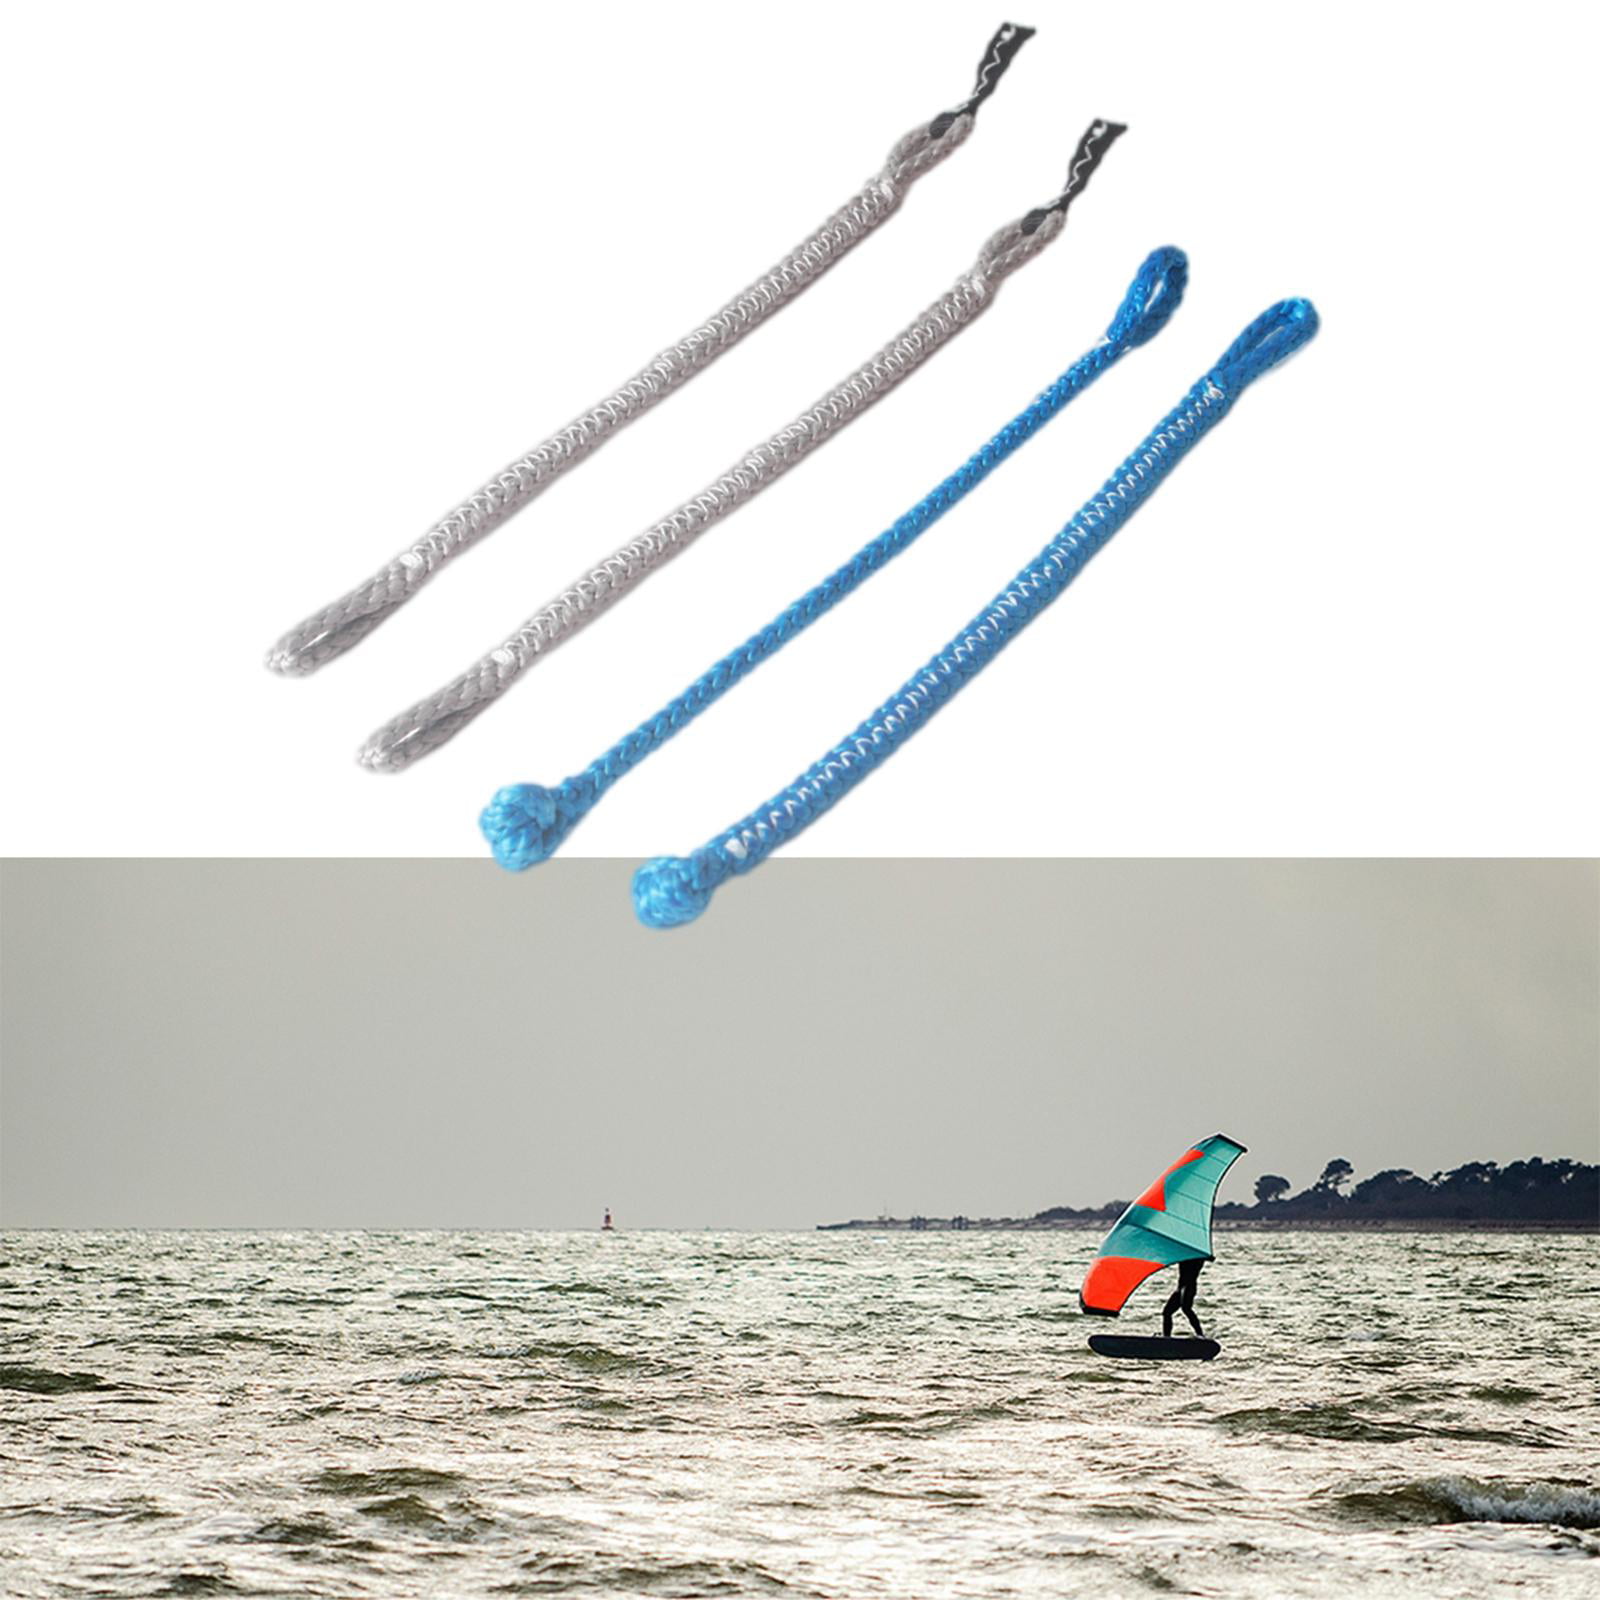 Colcolo 4 Pieces Kitesurfing Pigtails 1000kg Kite Kitesurfing Control Bar Replacement Pigtails Boarding Kite Accessories for Women Men Watersports